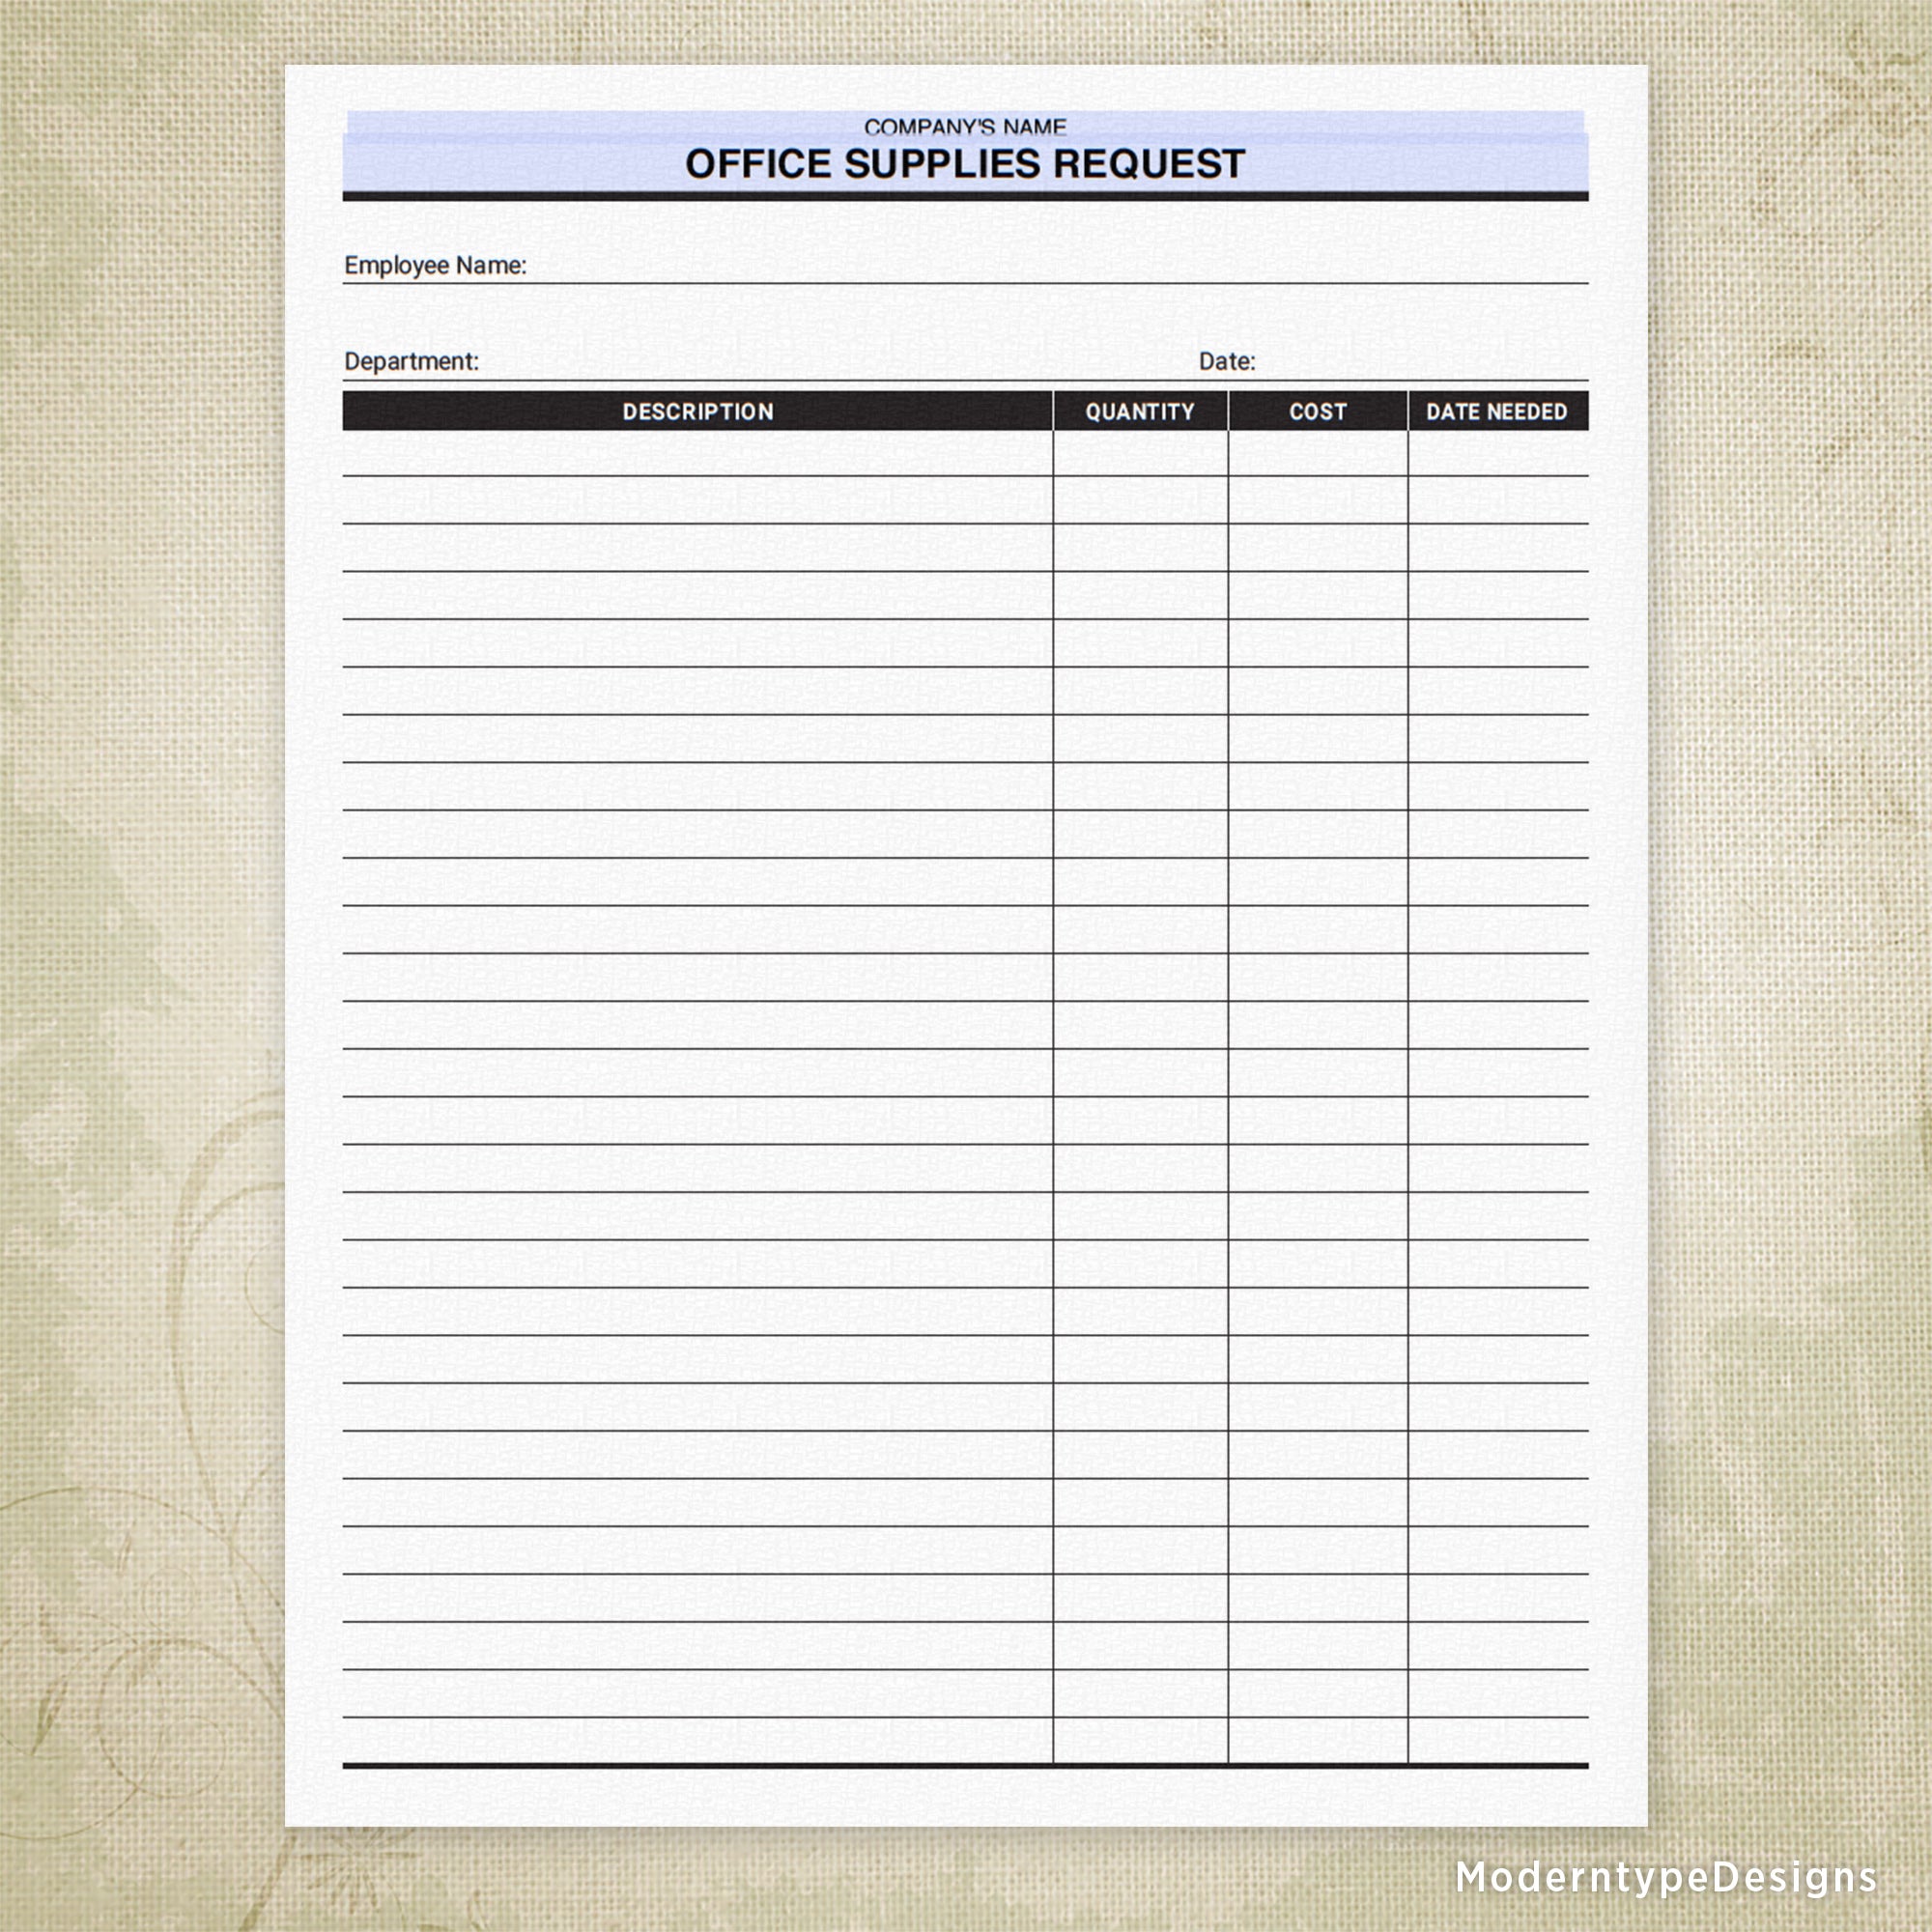 Office Supplies Request Printable Form, Personalized